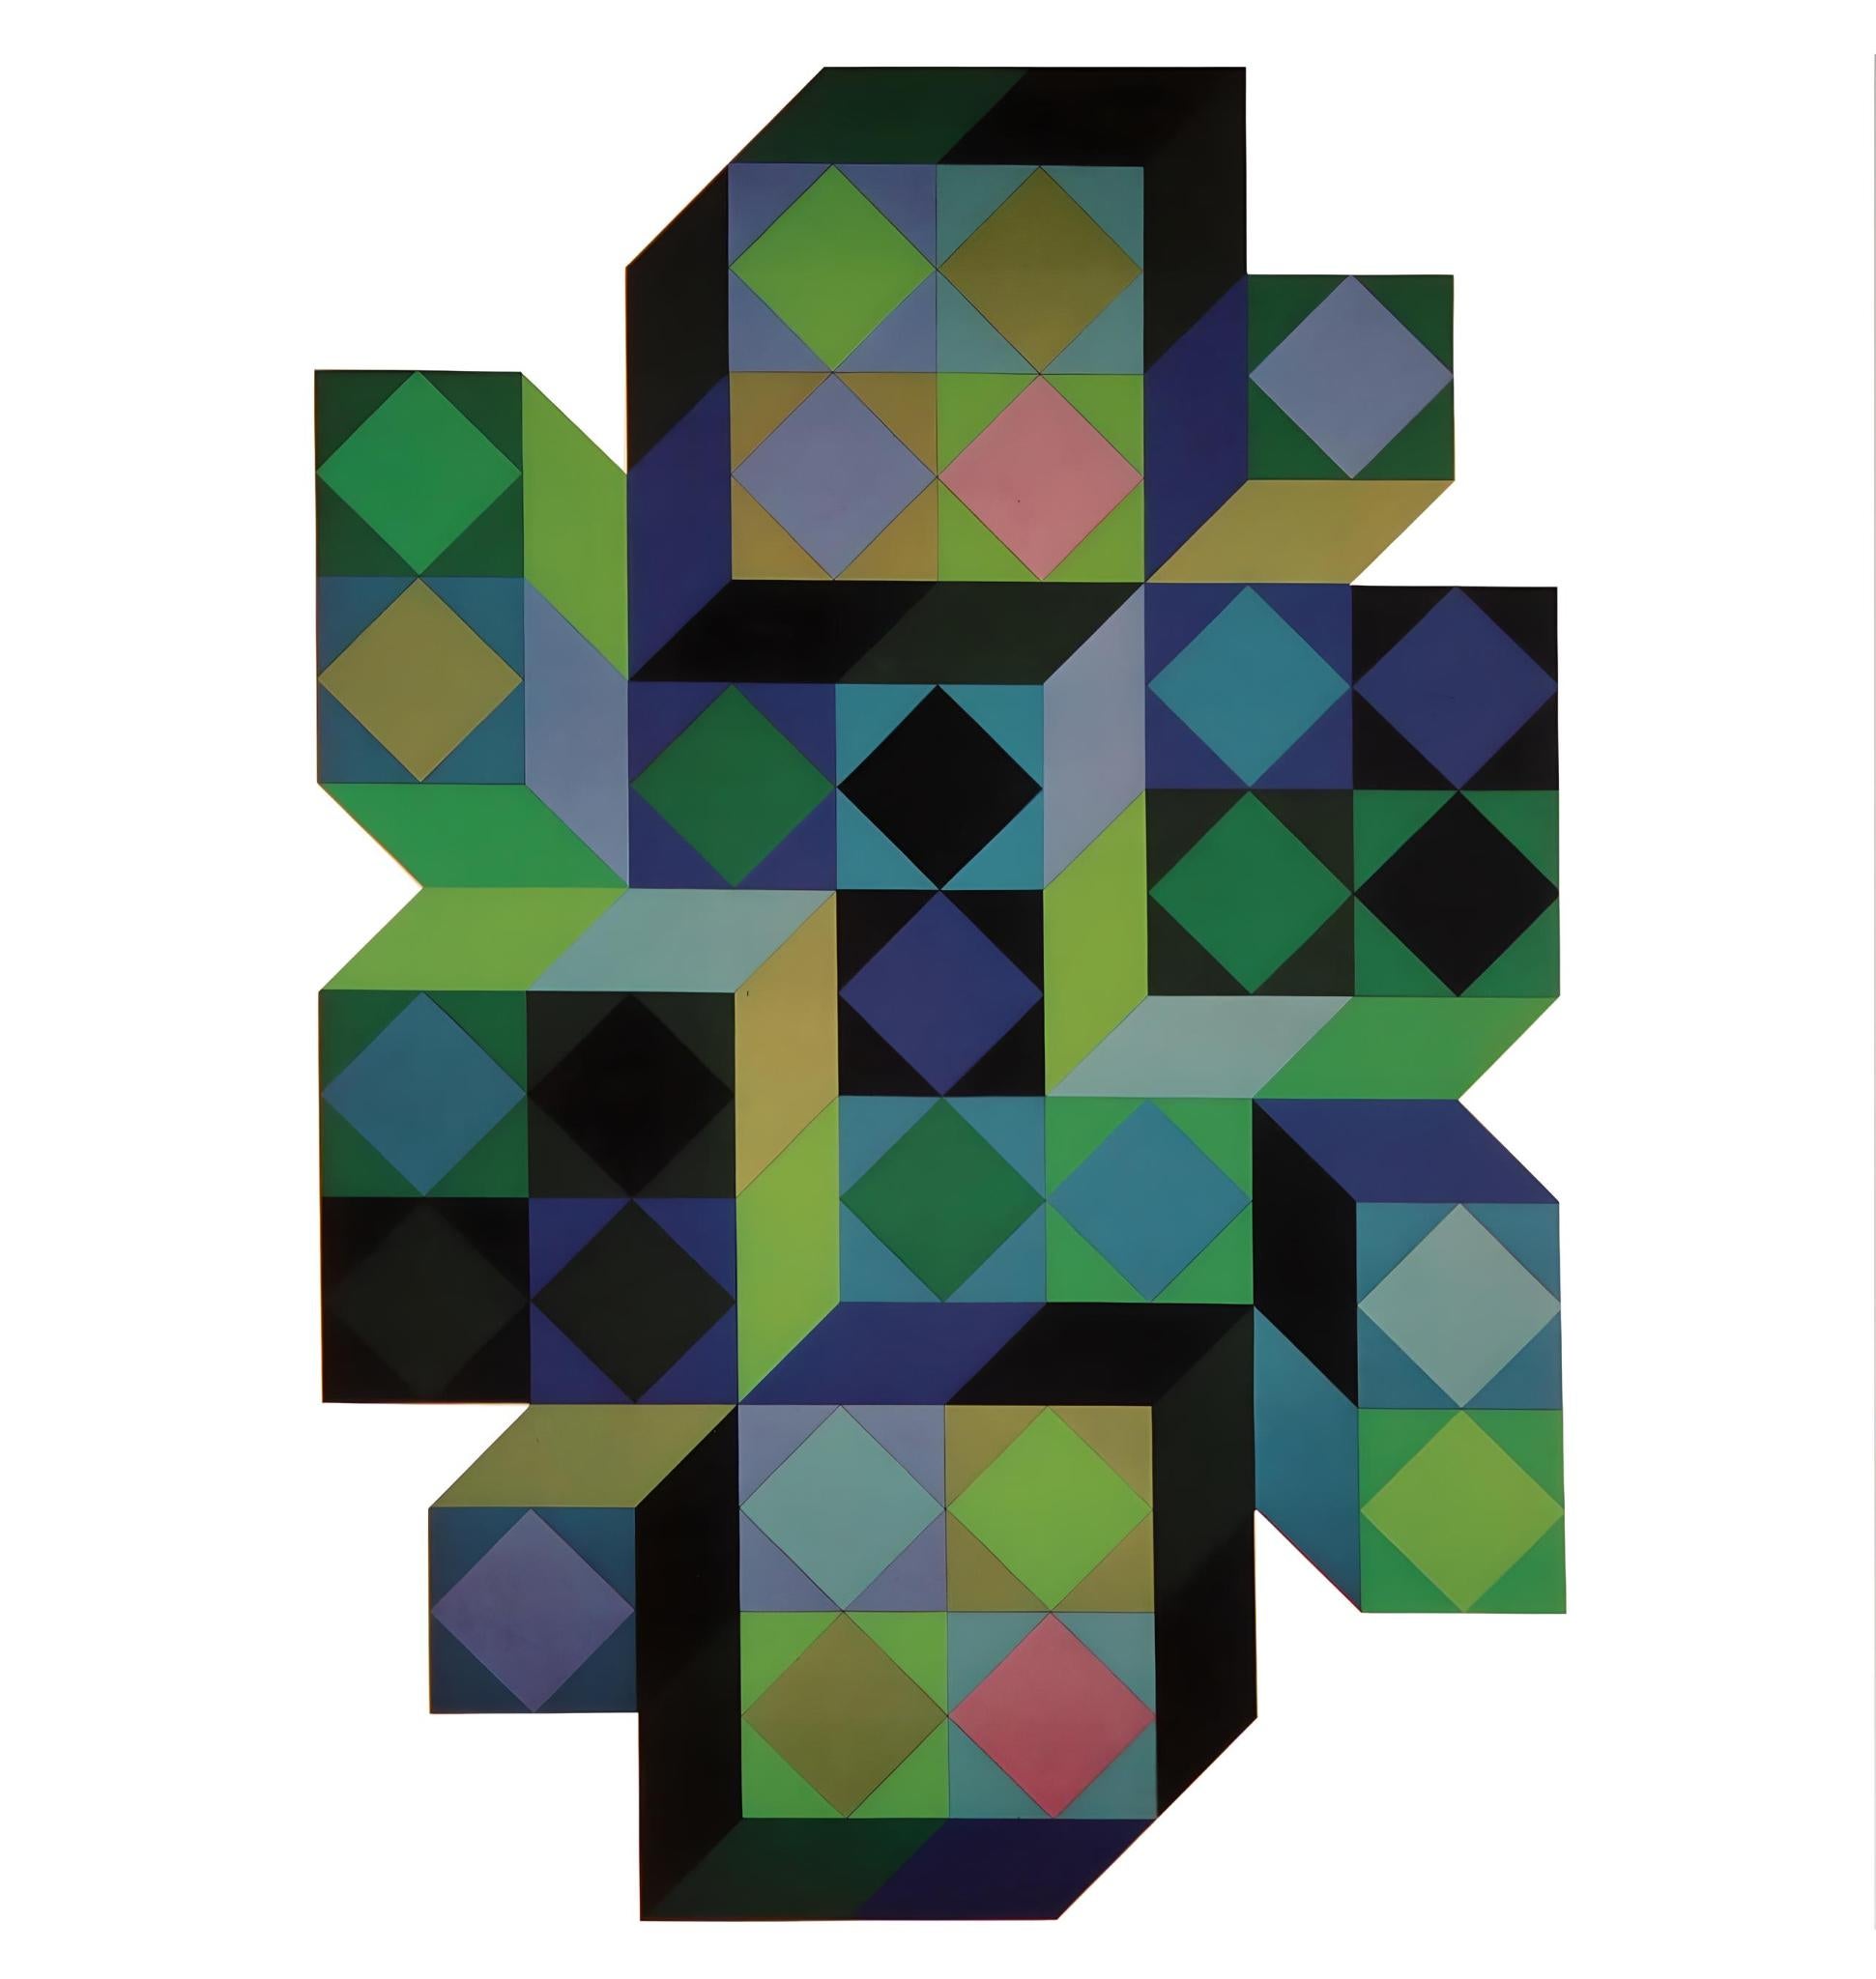 Victor Vasarely Abstract Print - Vasarely, Composition, Hommage à l'Hexagone (after)